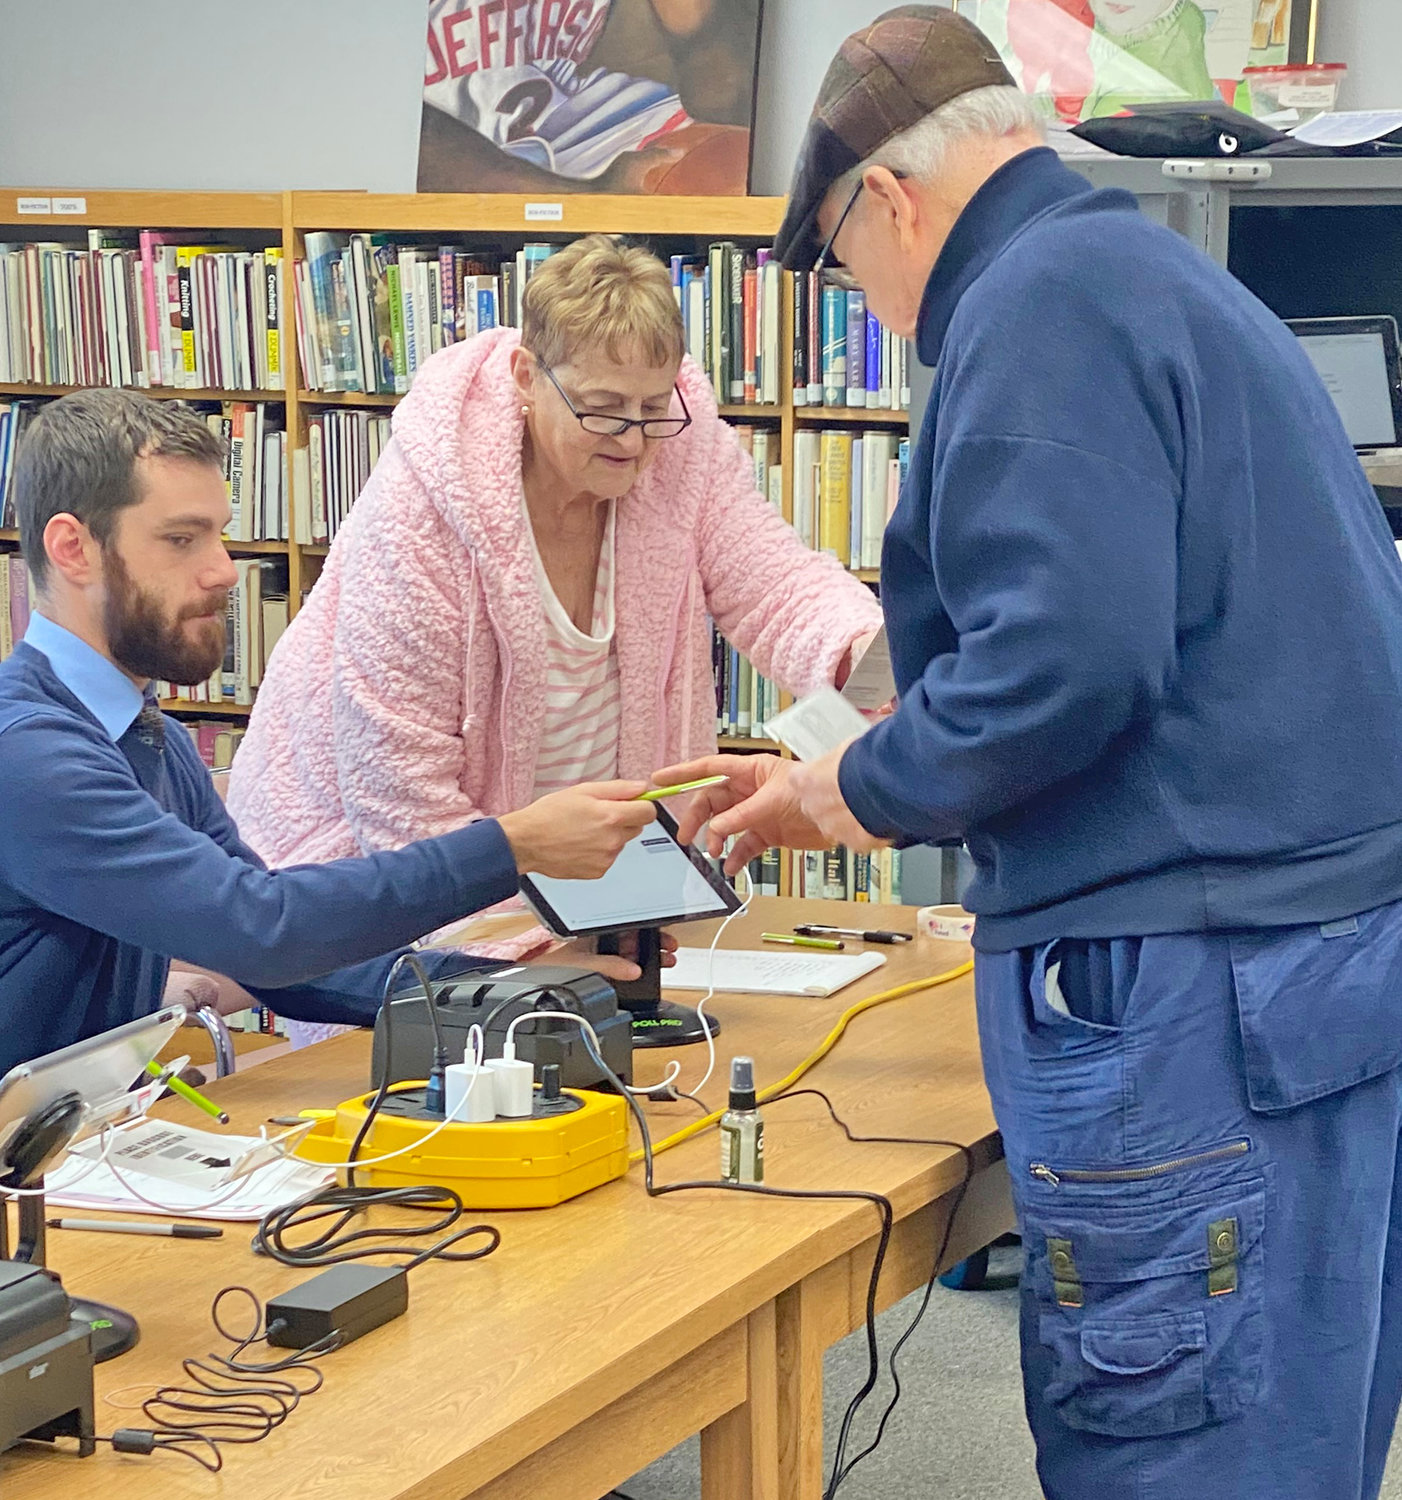 Adam Palmer, left, and Rose Koss, center, help to check in Oriskany resident John LaVoe on Tuesday at the Oriskany Public Library in Tuesday’s general election.